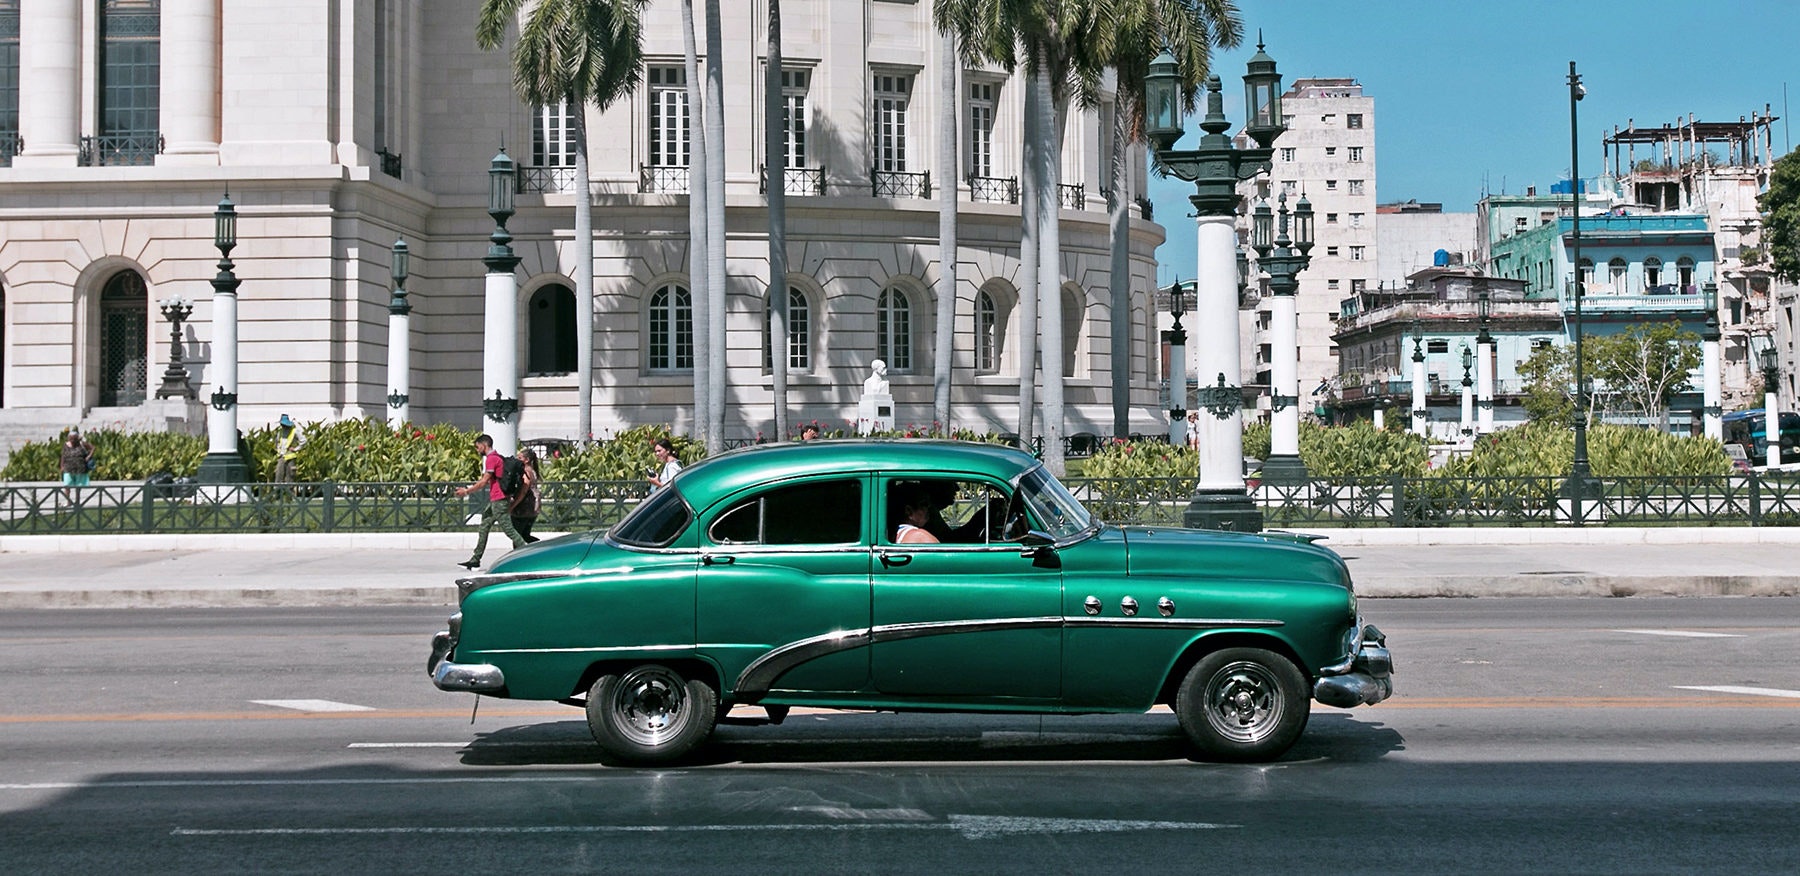 Which American singer performed in Havana in 2016, marking a historic moment in US-Cuba relations?